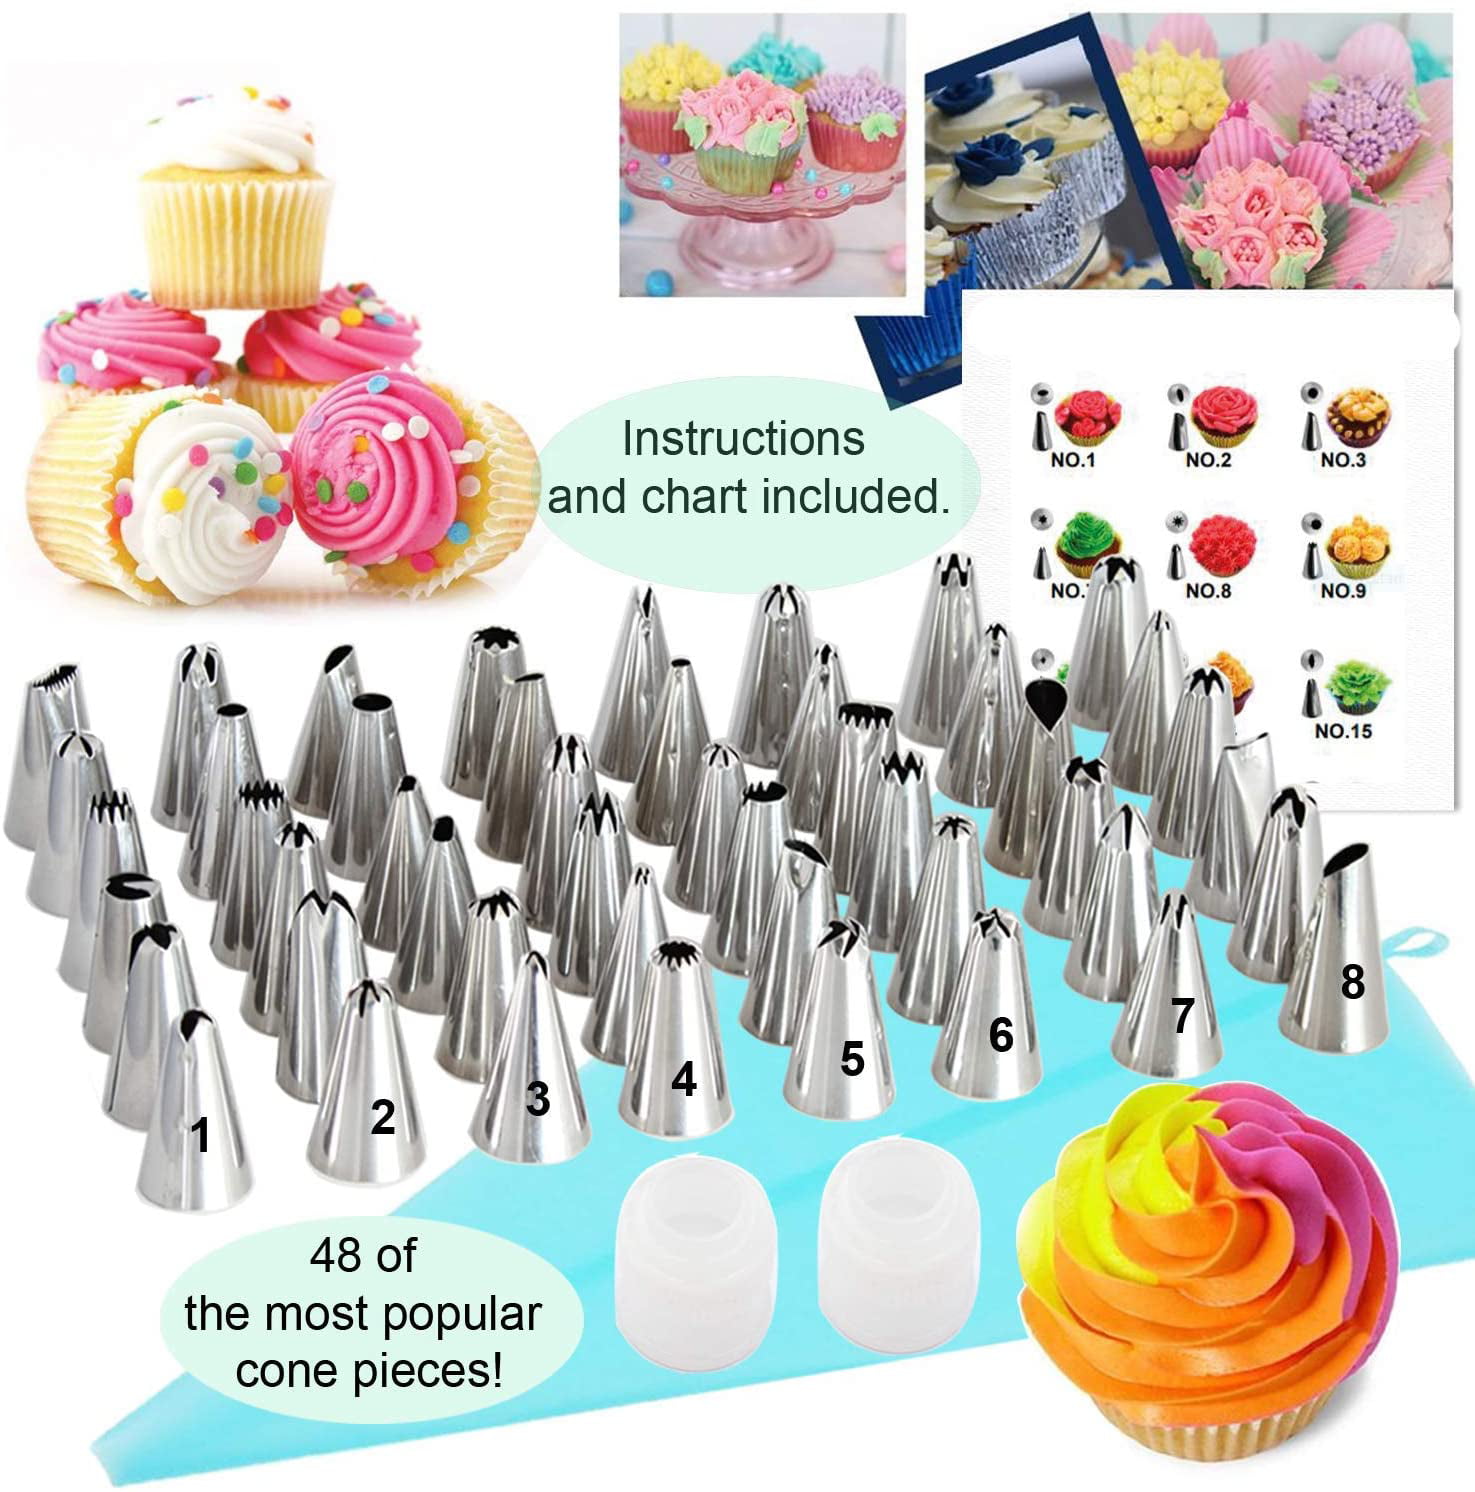 Premium Queen Nozzles Kit Icing Piping Nozzle Tips Cake Pastry Decor Baking Tool 